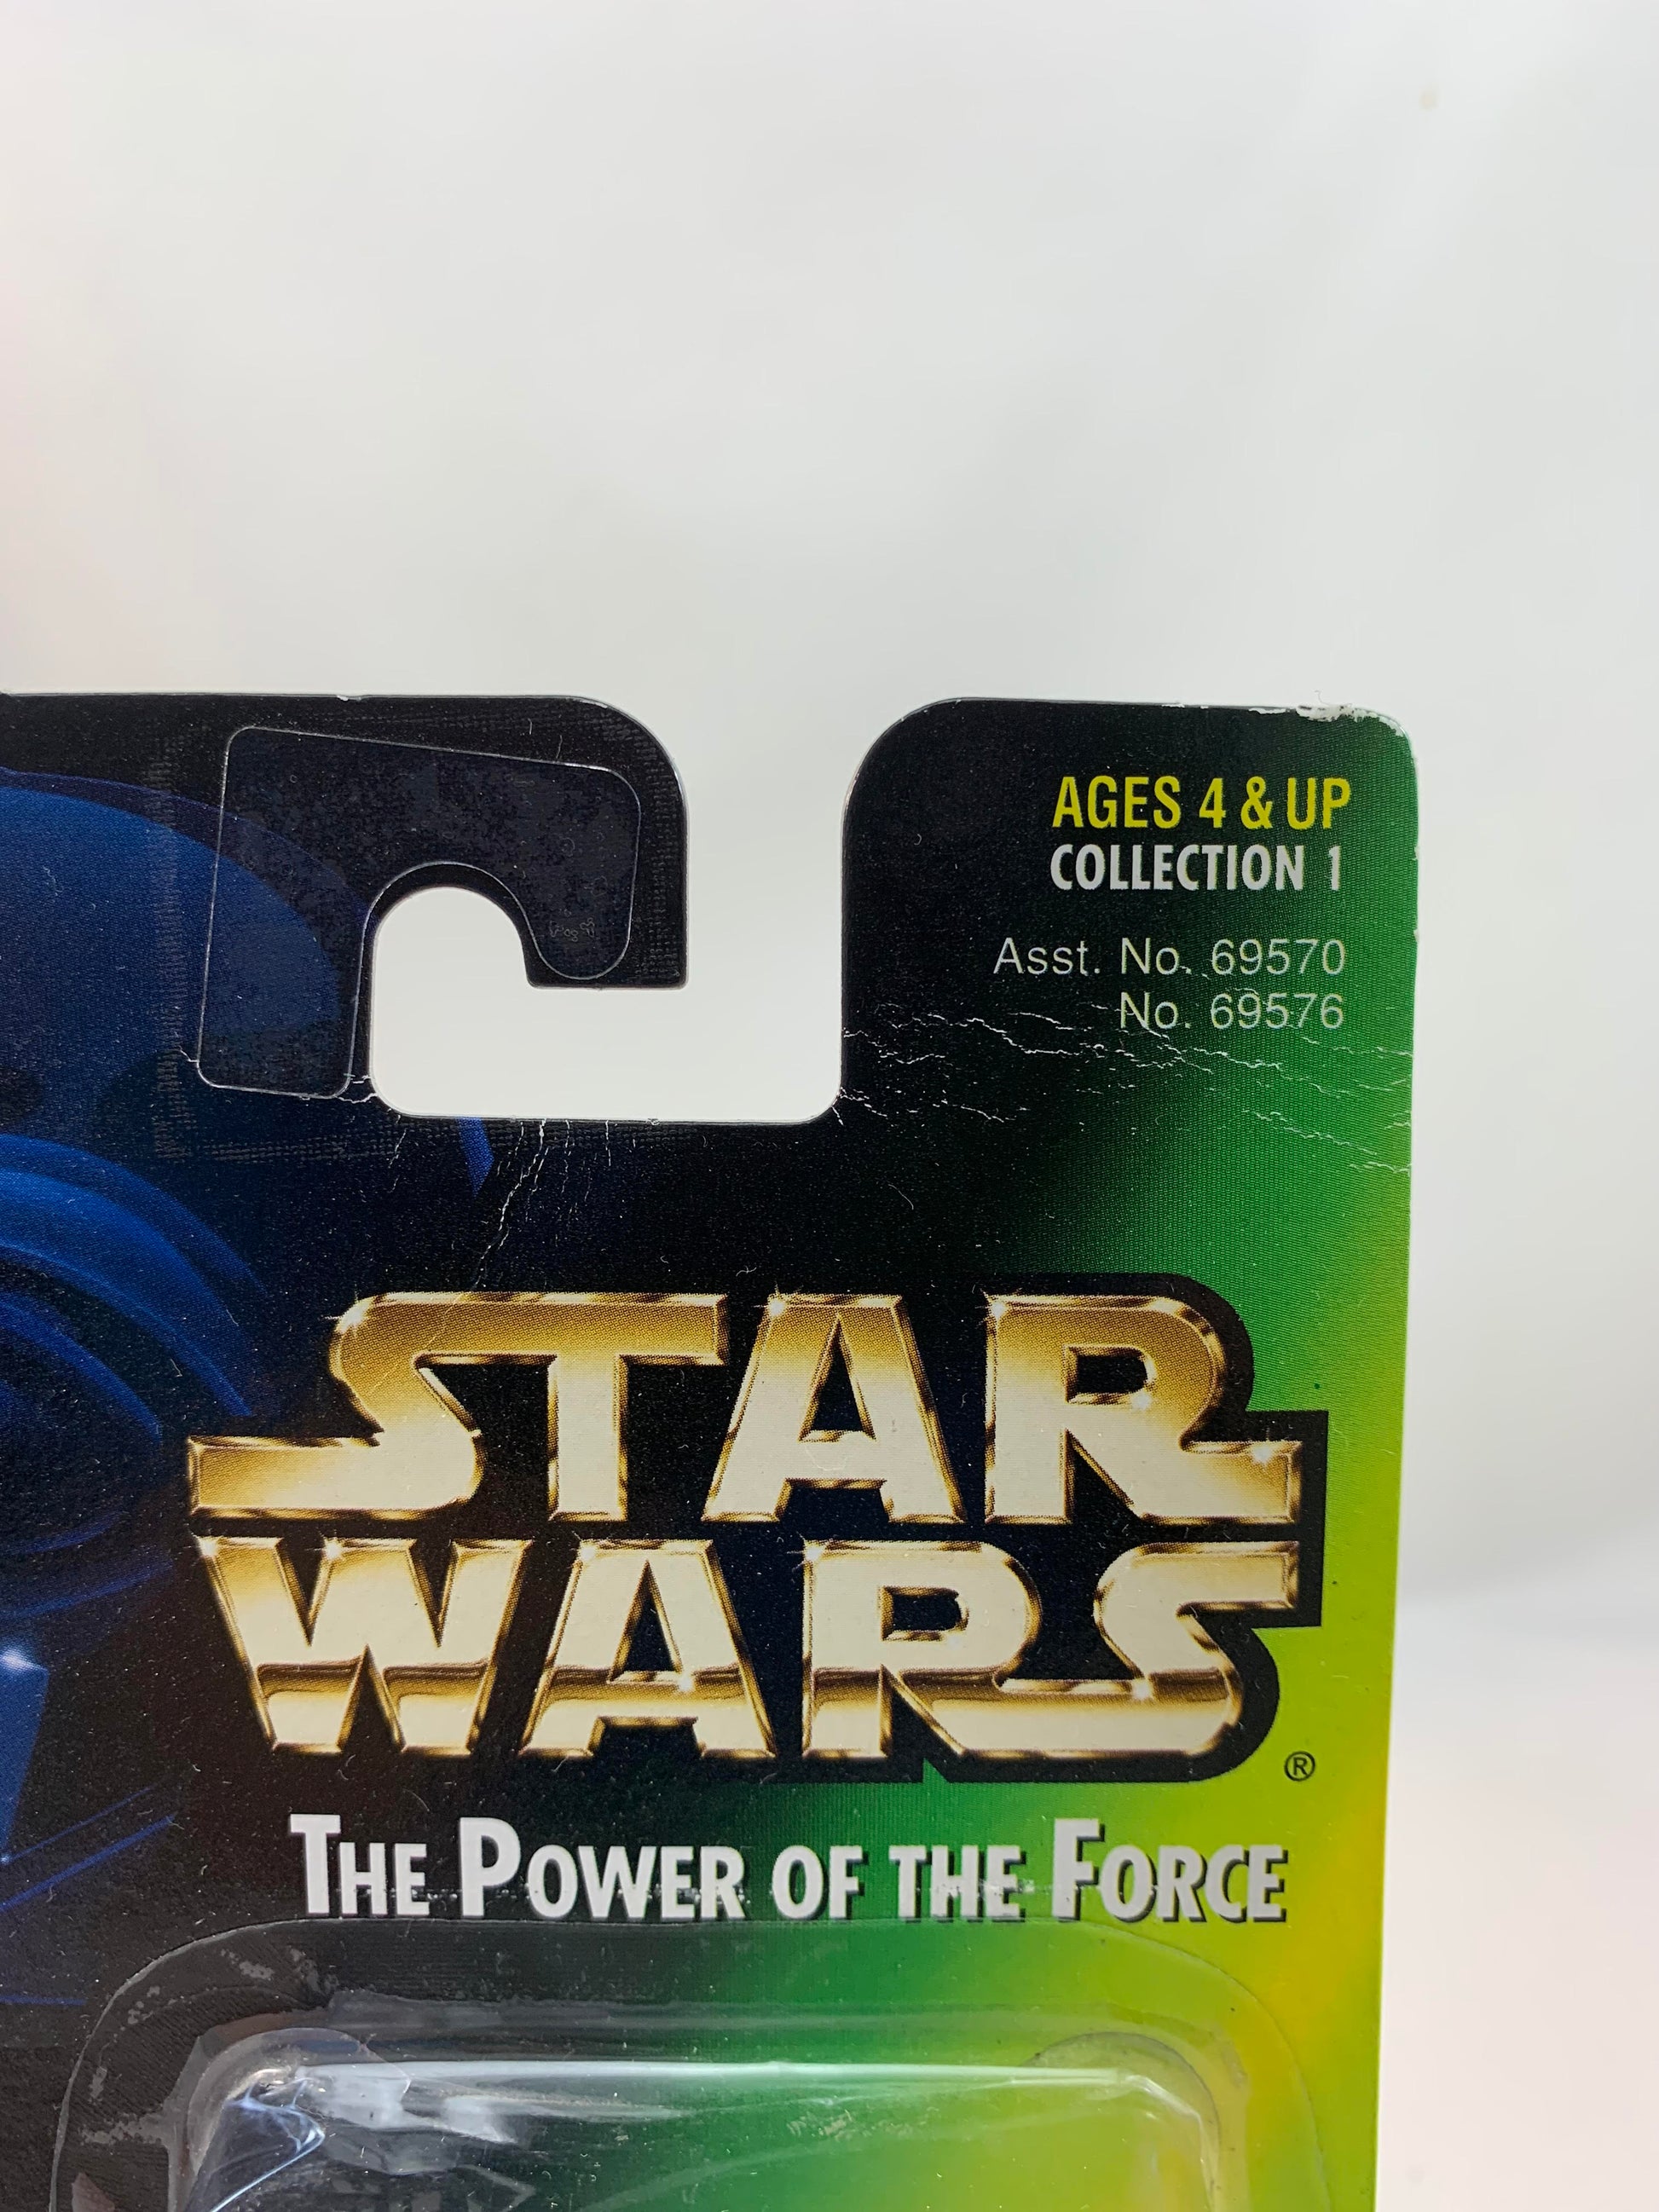 Kenner Hasbro Star Wars Power Of The Force 2 Green Card HOLOGRAM Ben (Obi Wan) Kenobi with Lightsaber and Removable Cape - MOC